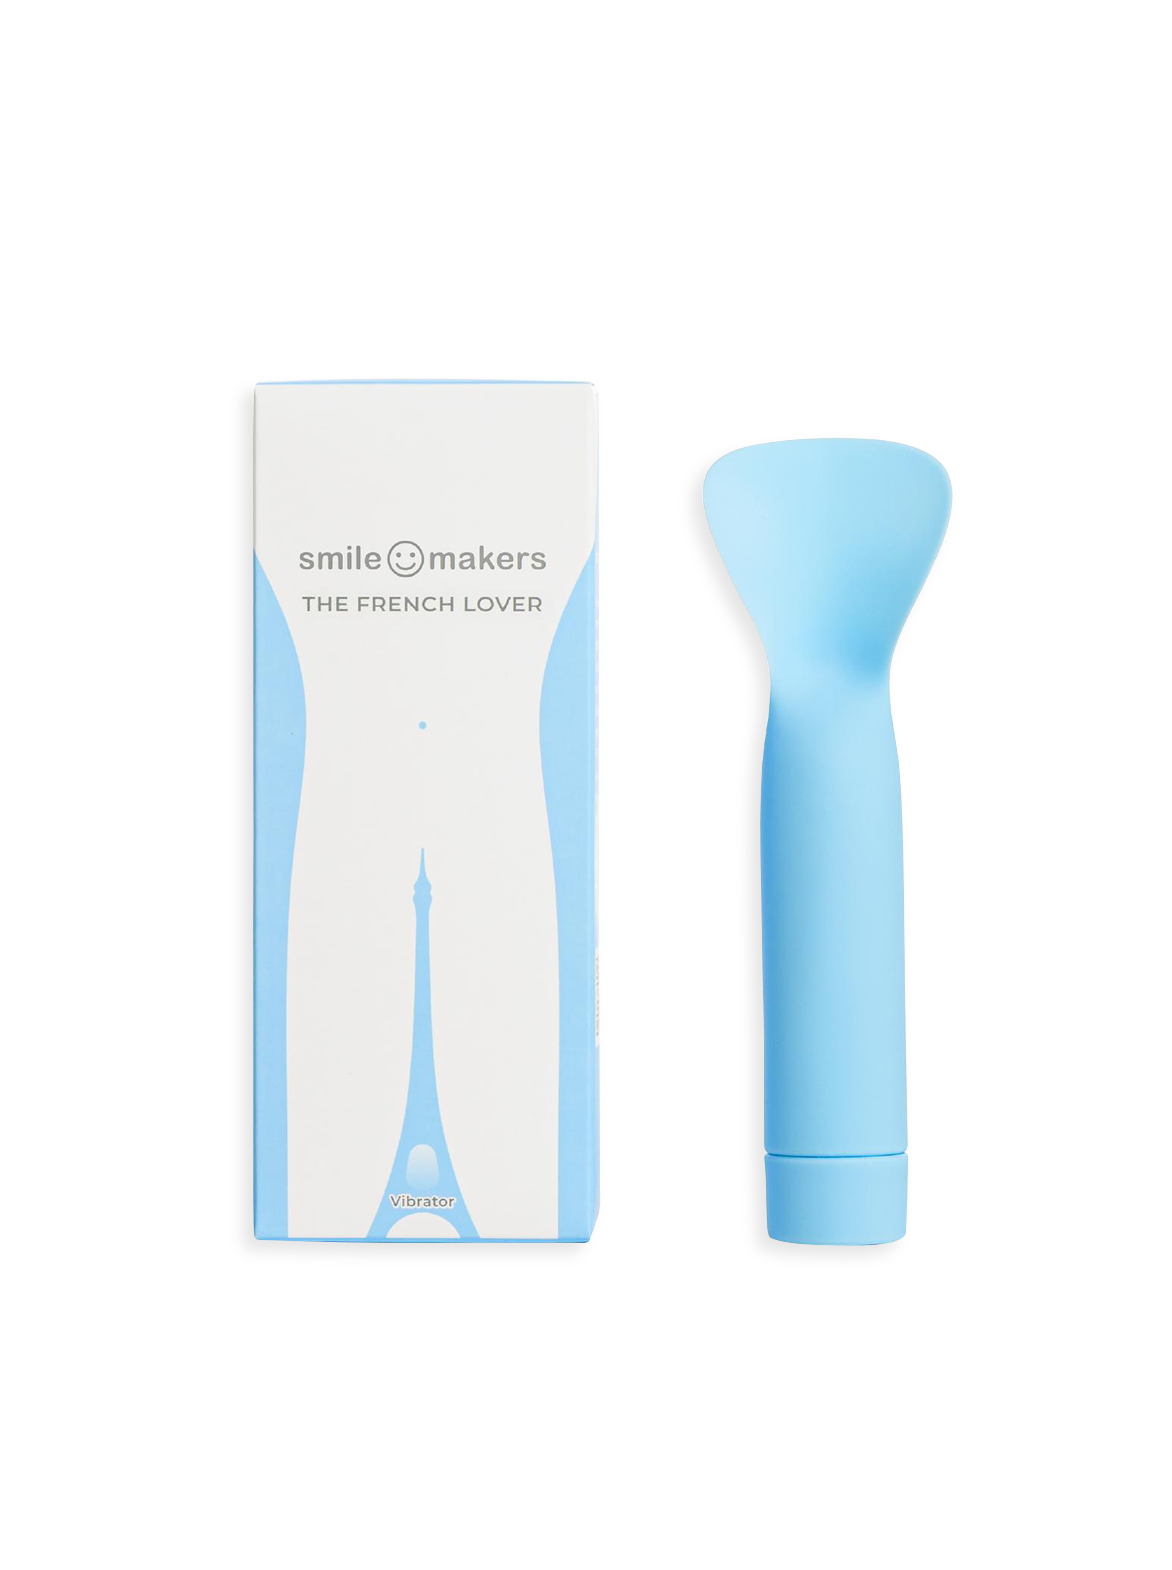 Tongue Vibrator Makers Freiraum Soft - Lover – Super French The Smile